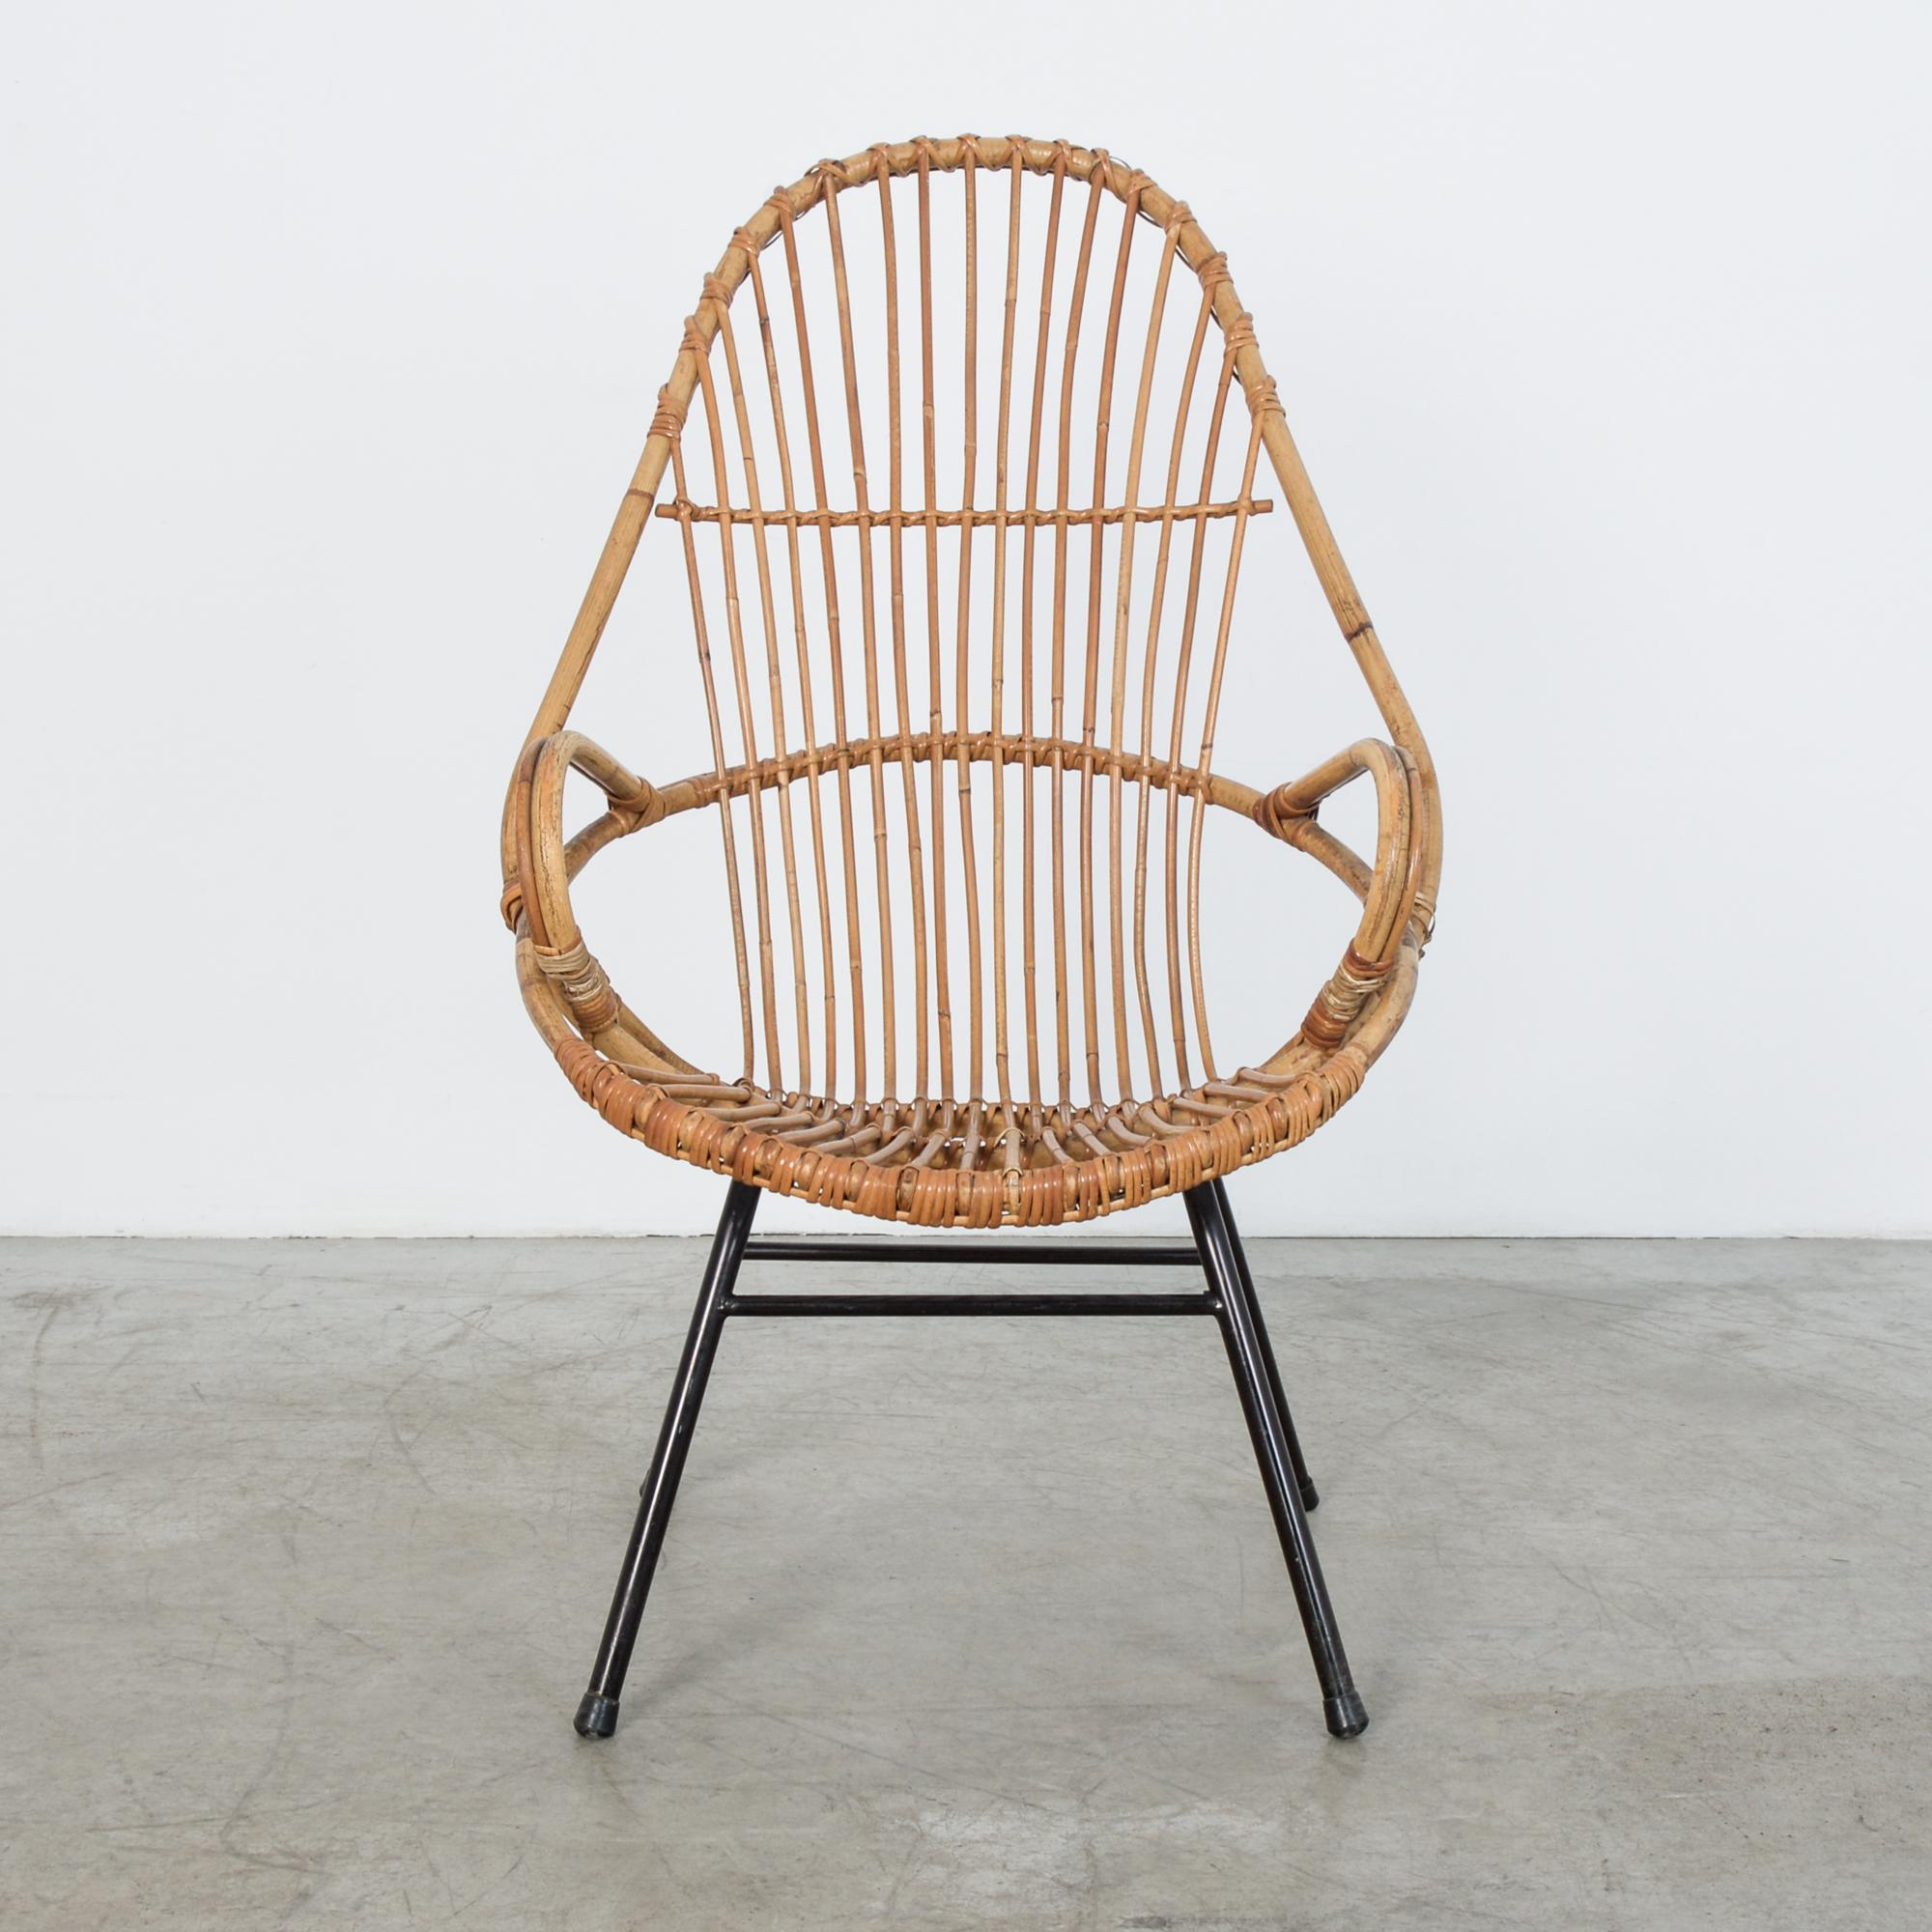 Bamboo and rattan chair from 1960s, France. On a simple metal frame a stylish curved seat reclines comfortably. This informal bamboo chair gives us a wanted moment of relaxation.
   